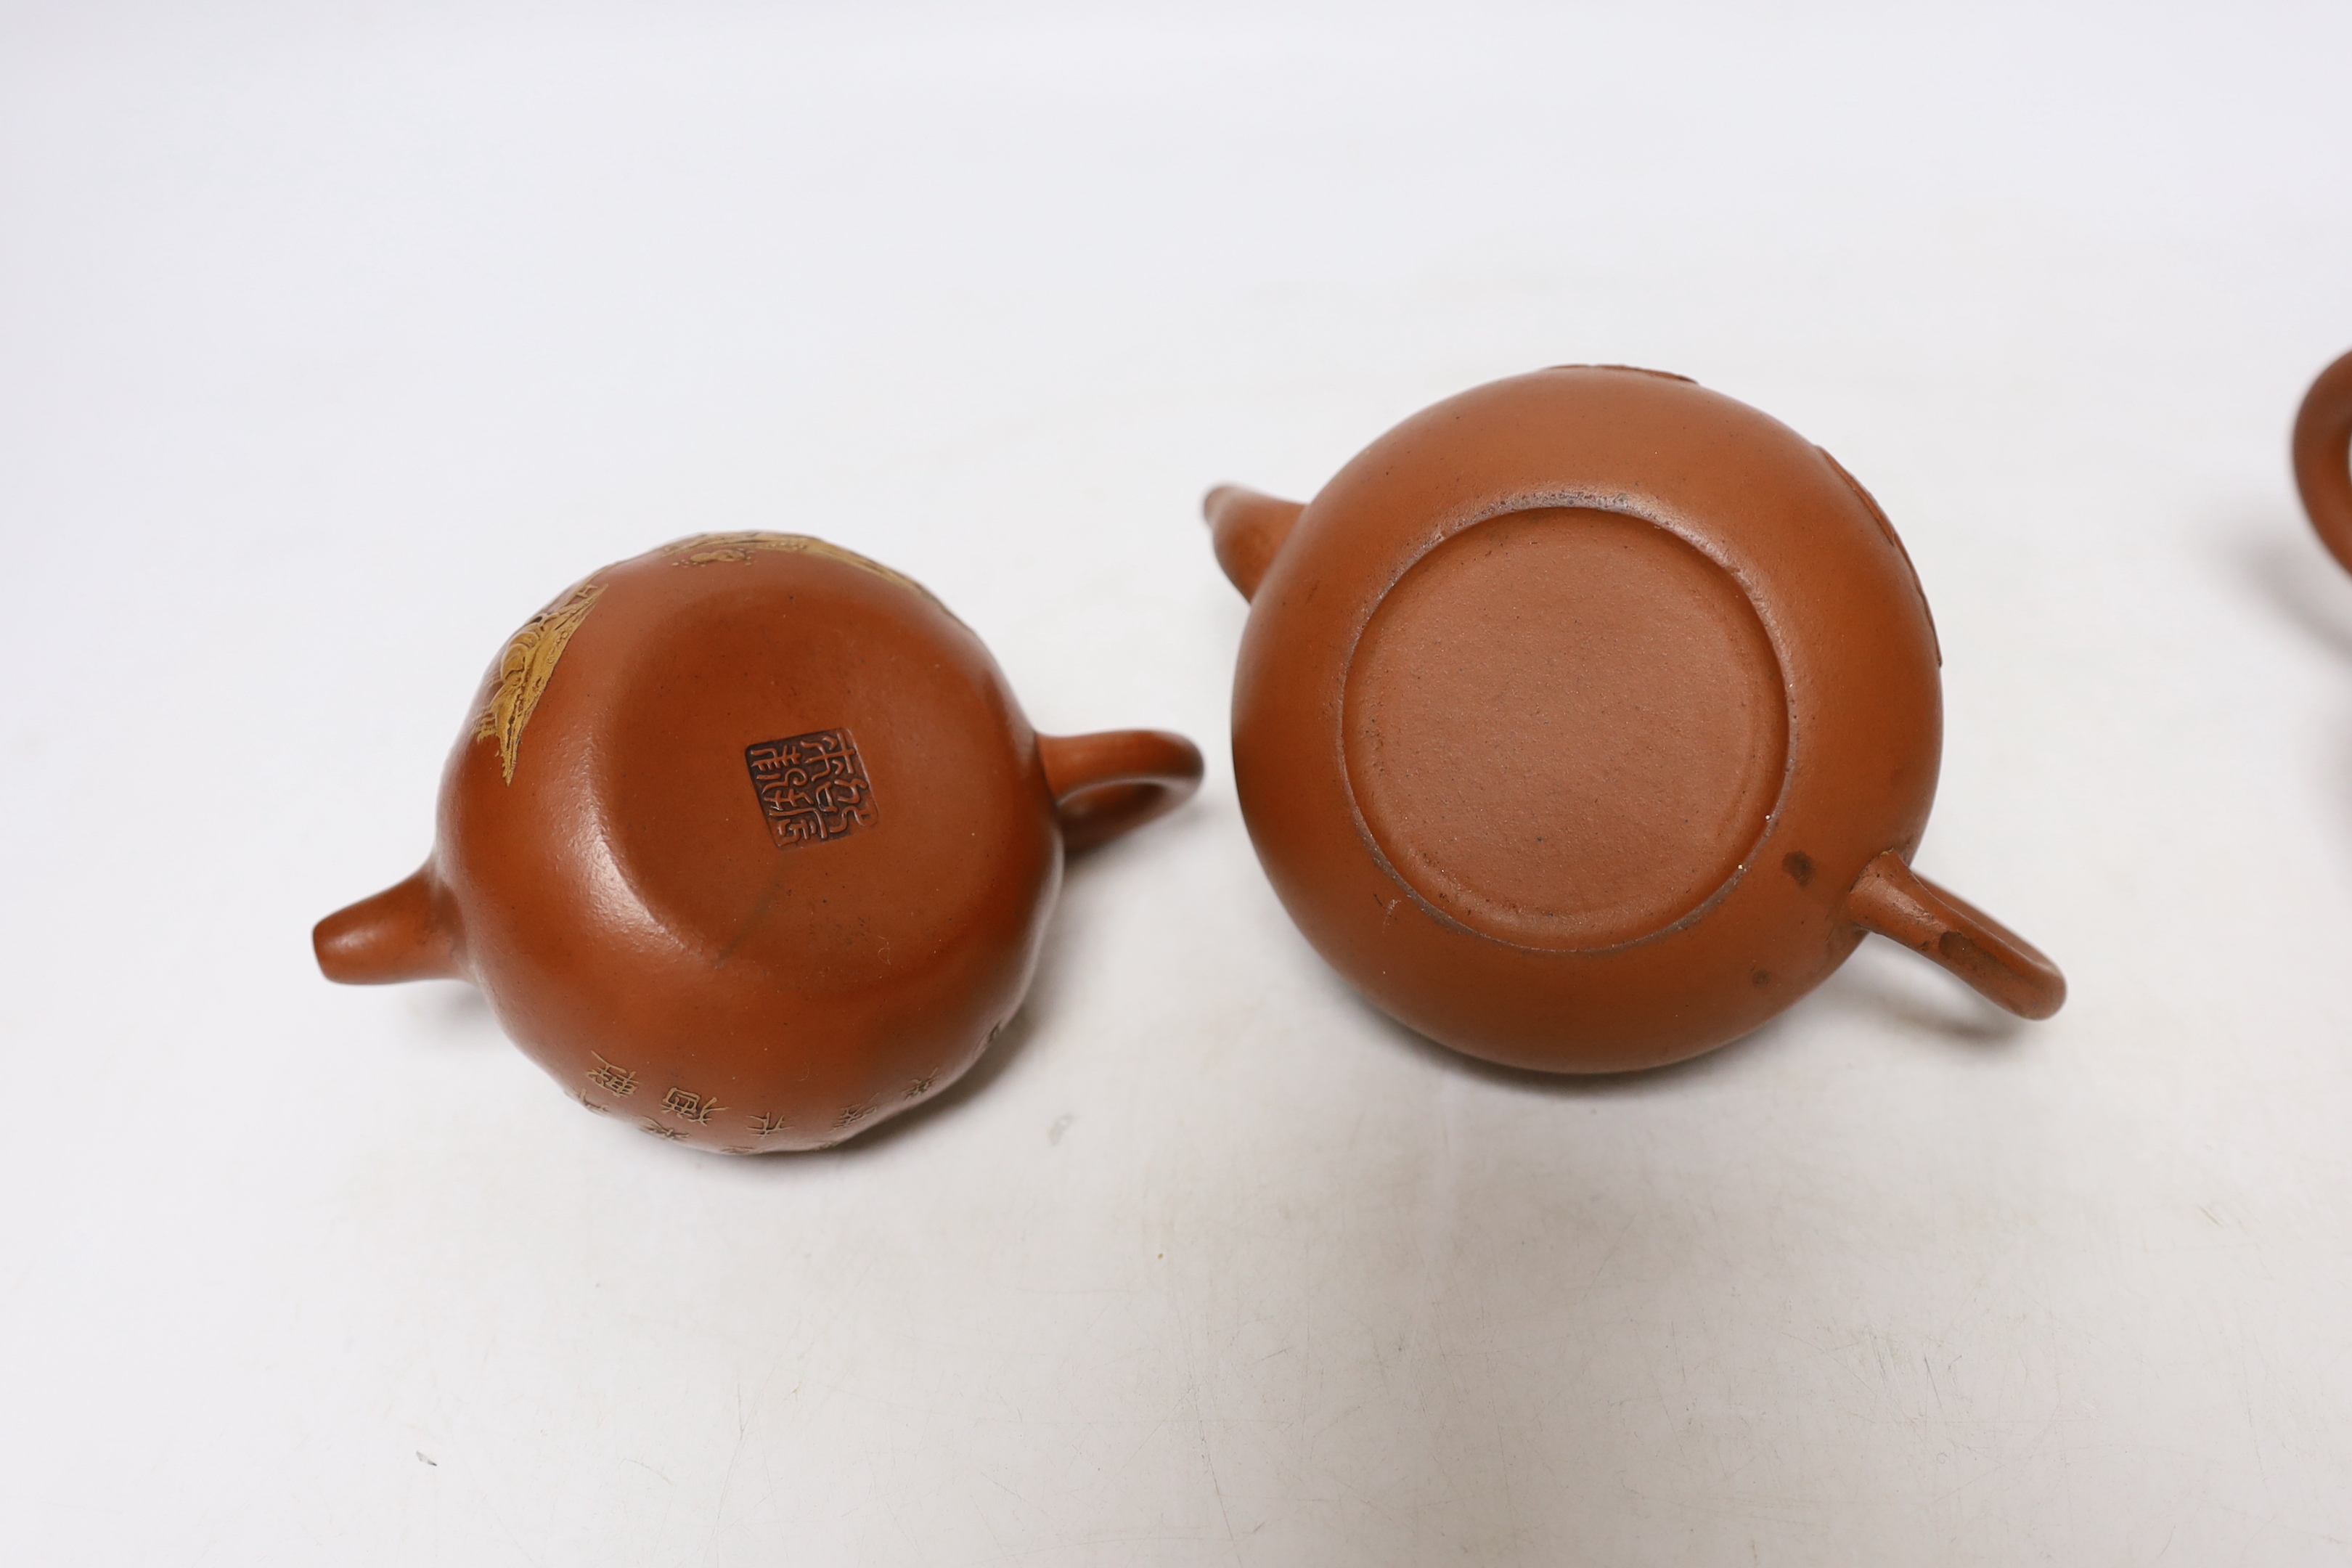 Four Chinese Yixing teapots, one slip decorated with a landscape, tallest 10.5cm